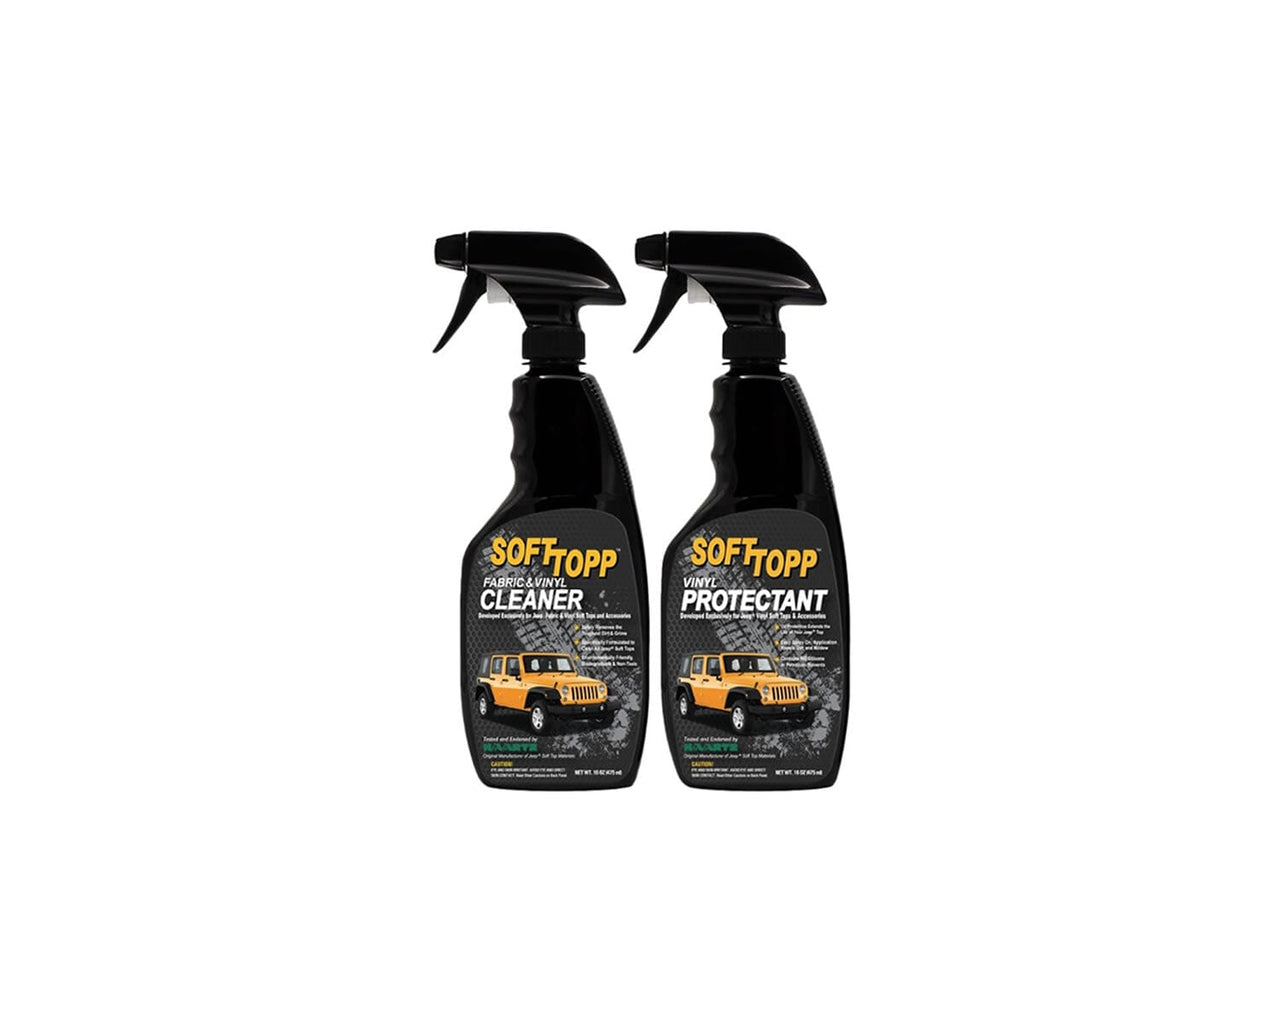 VINYL SOFT TOP CLEANER & PROTECTANT KIT Vinyl Cleaner and Protectant 